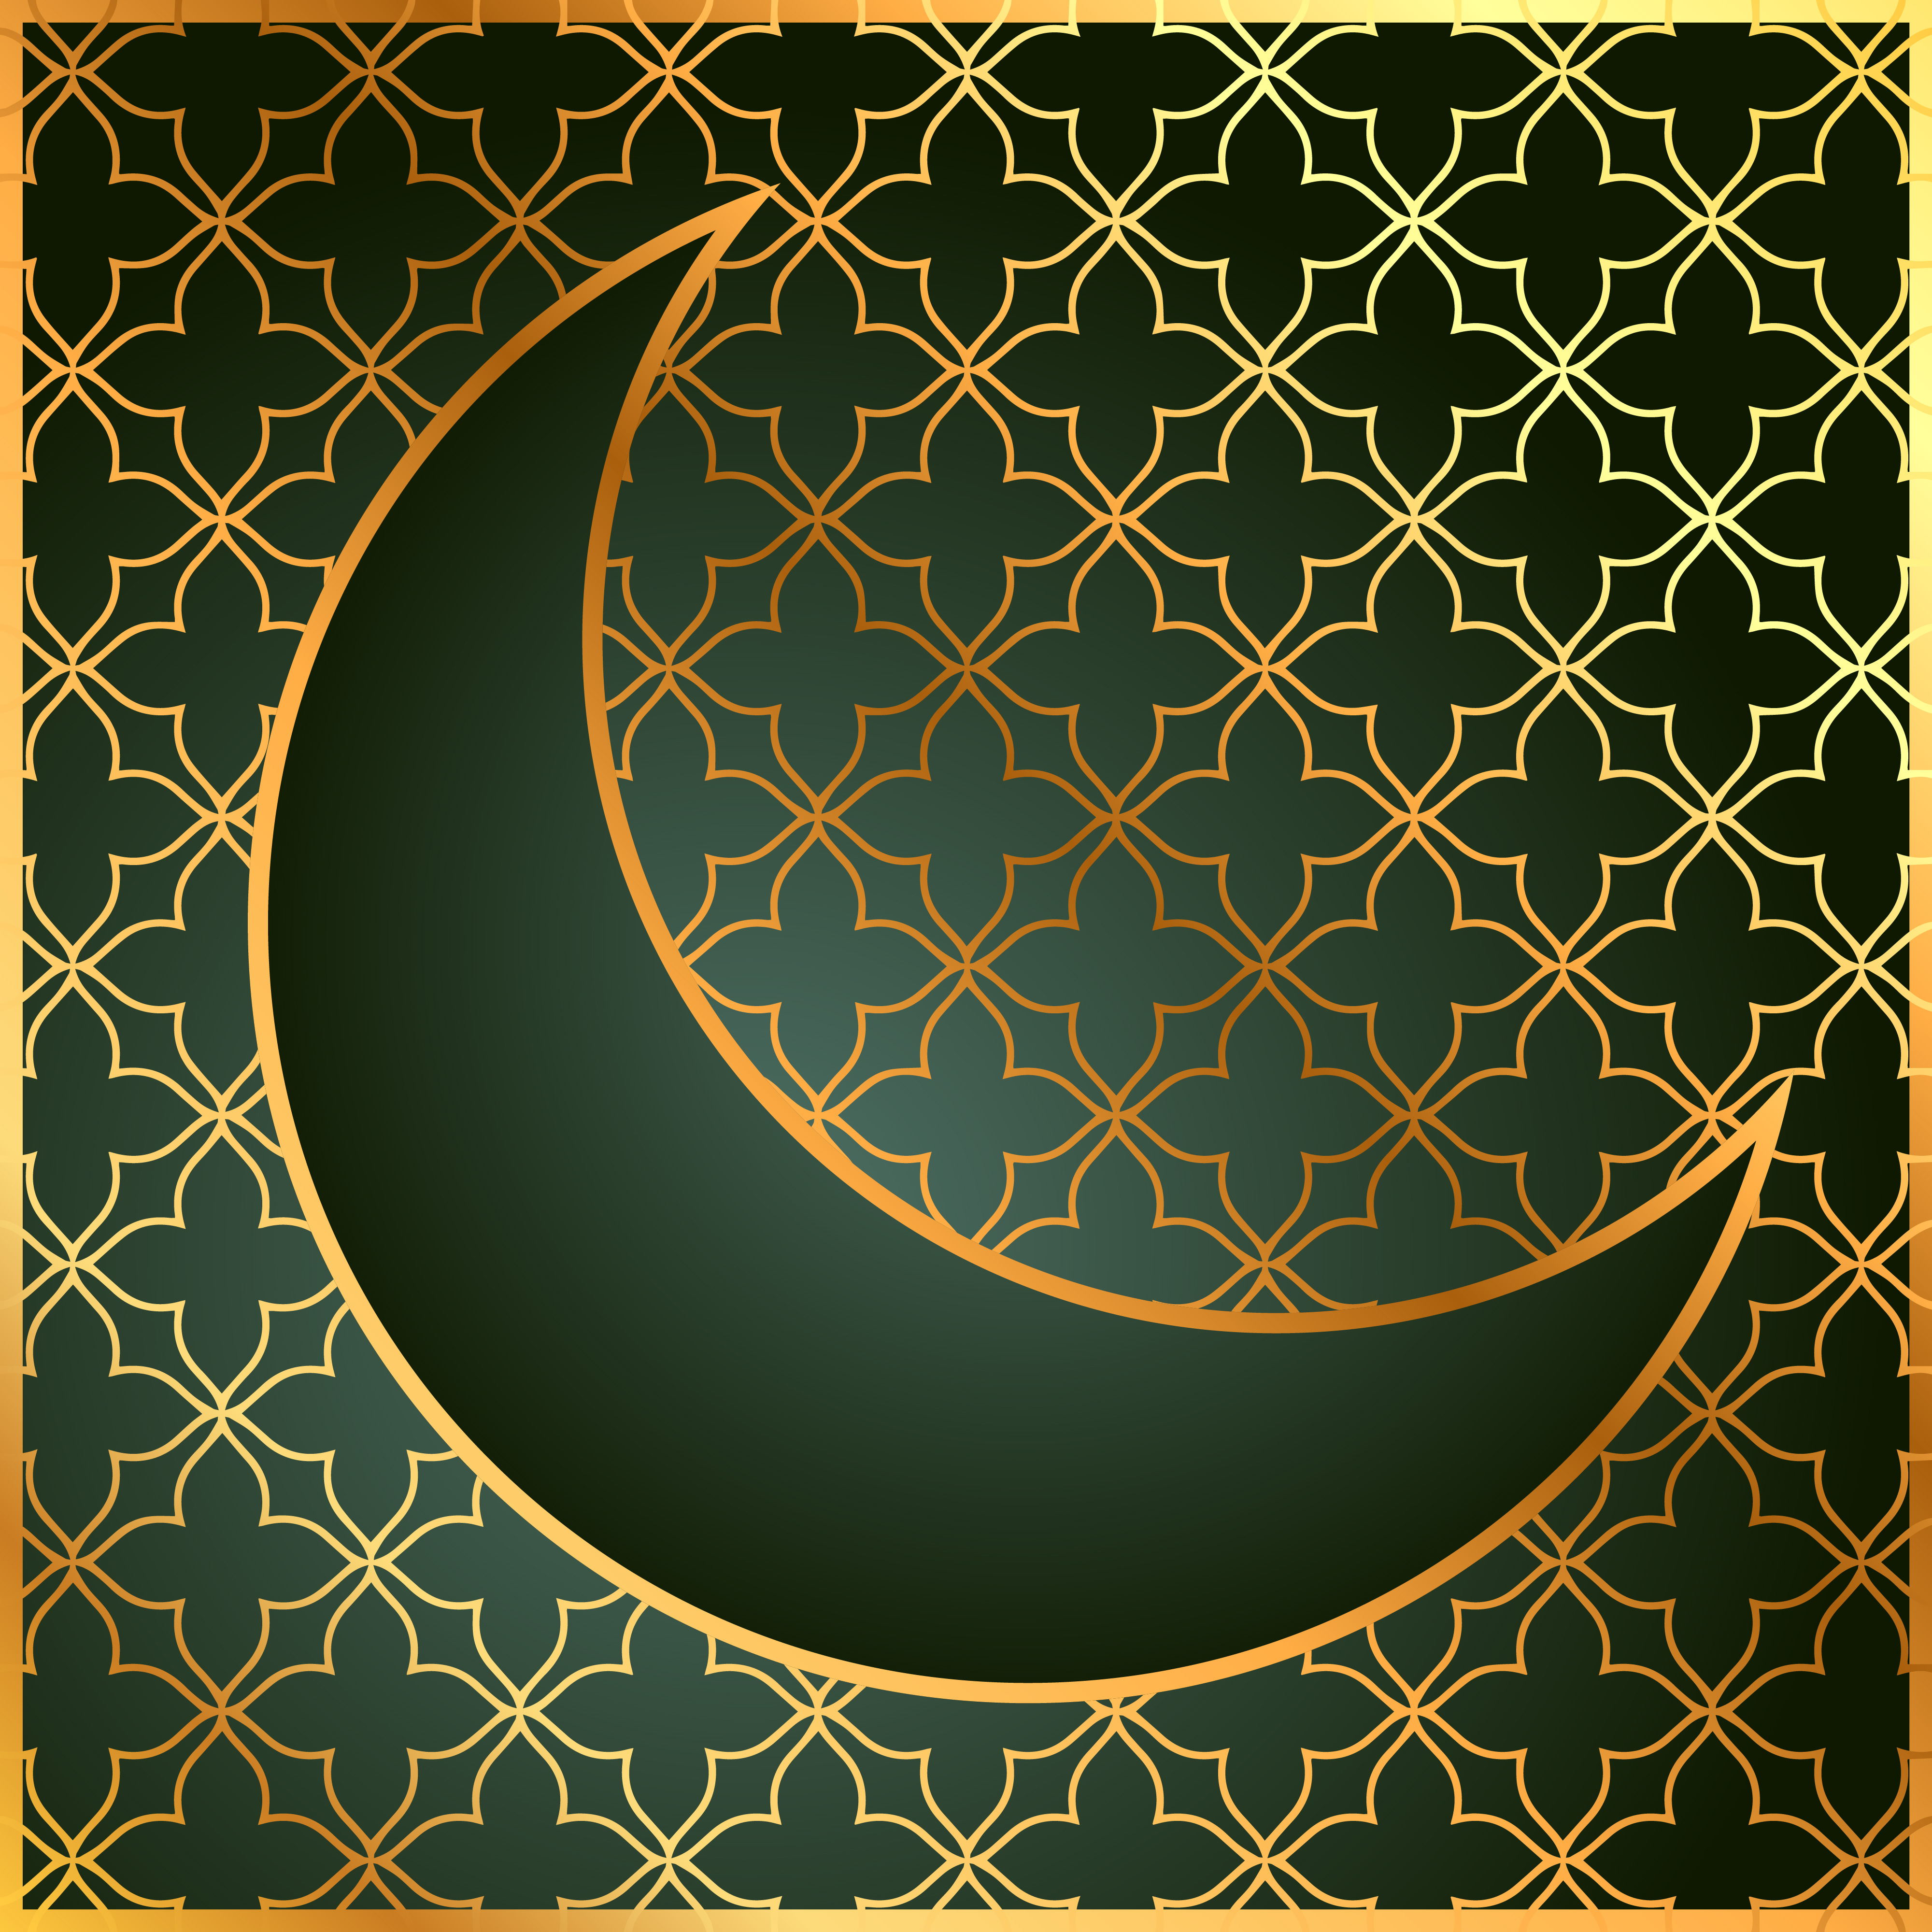 Pattern background with moon in golden color - Download 